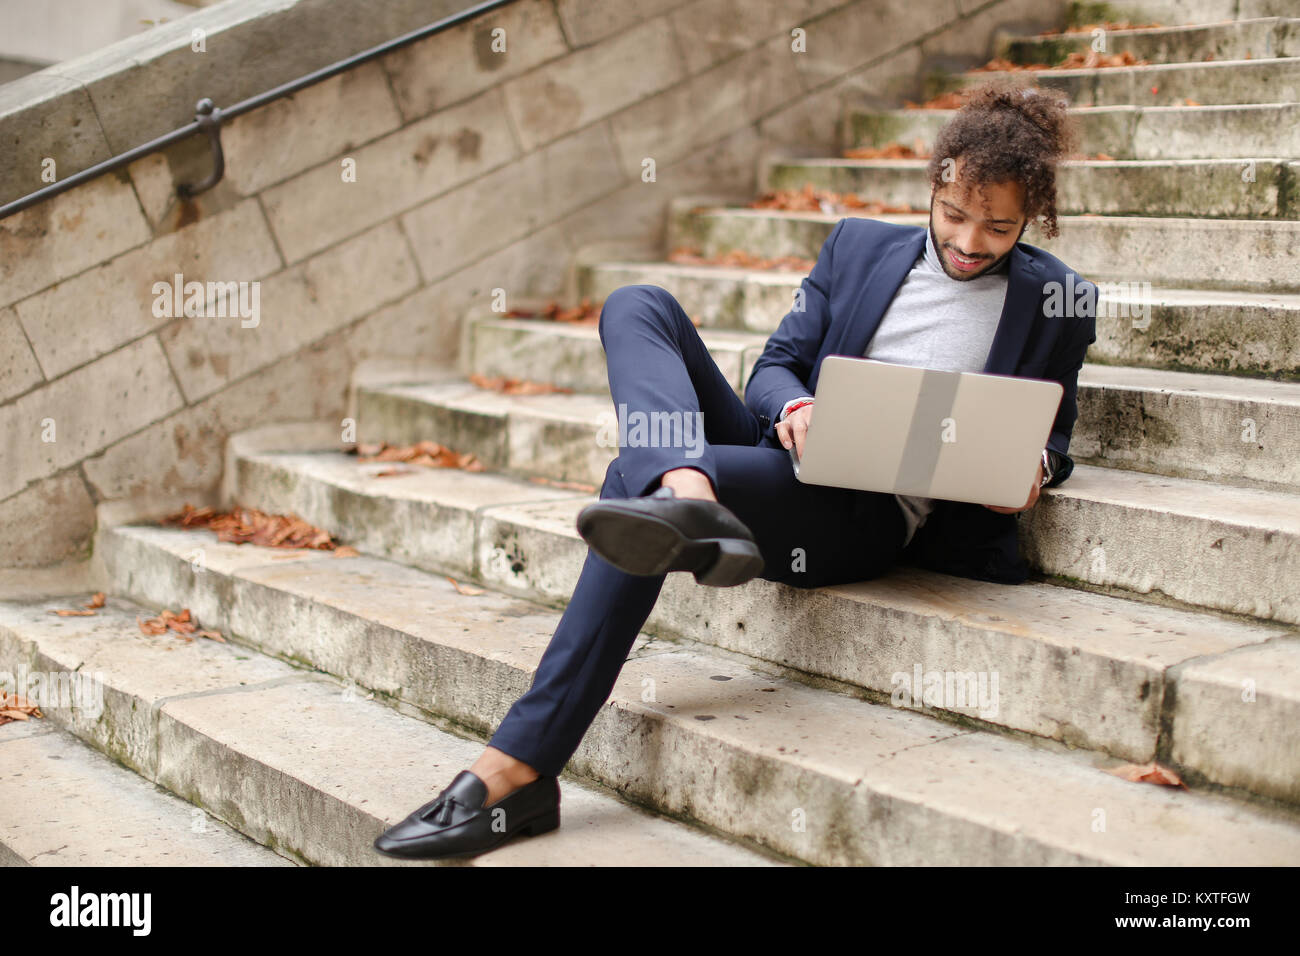 Personnel consultant chatting with client by laptop on steps. Stock Photo